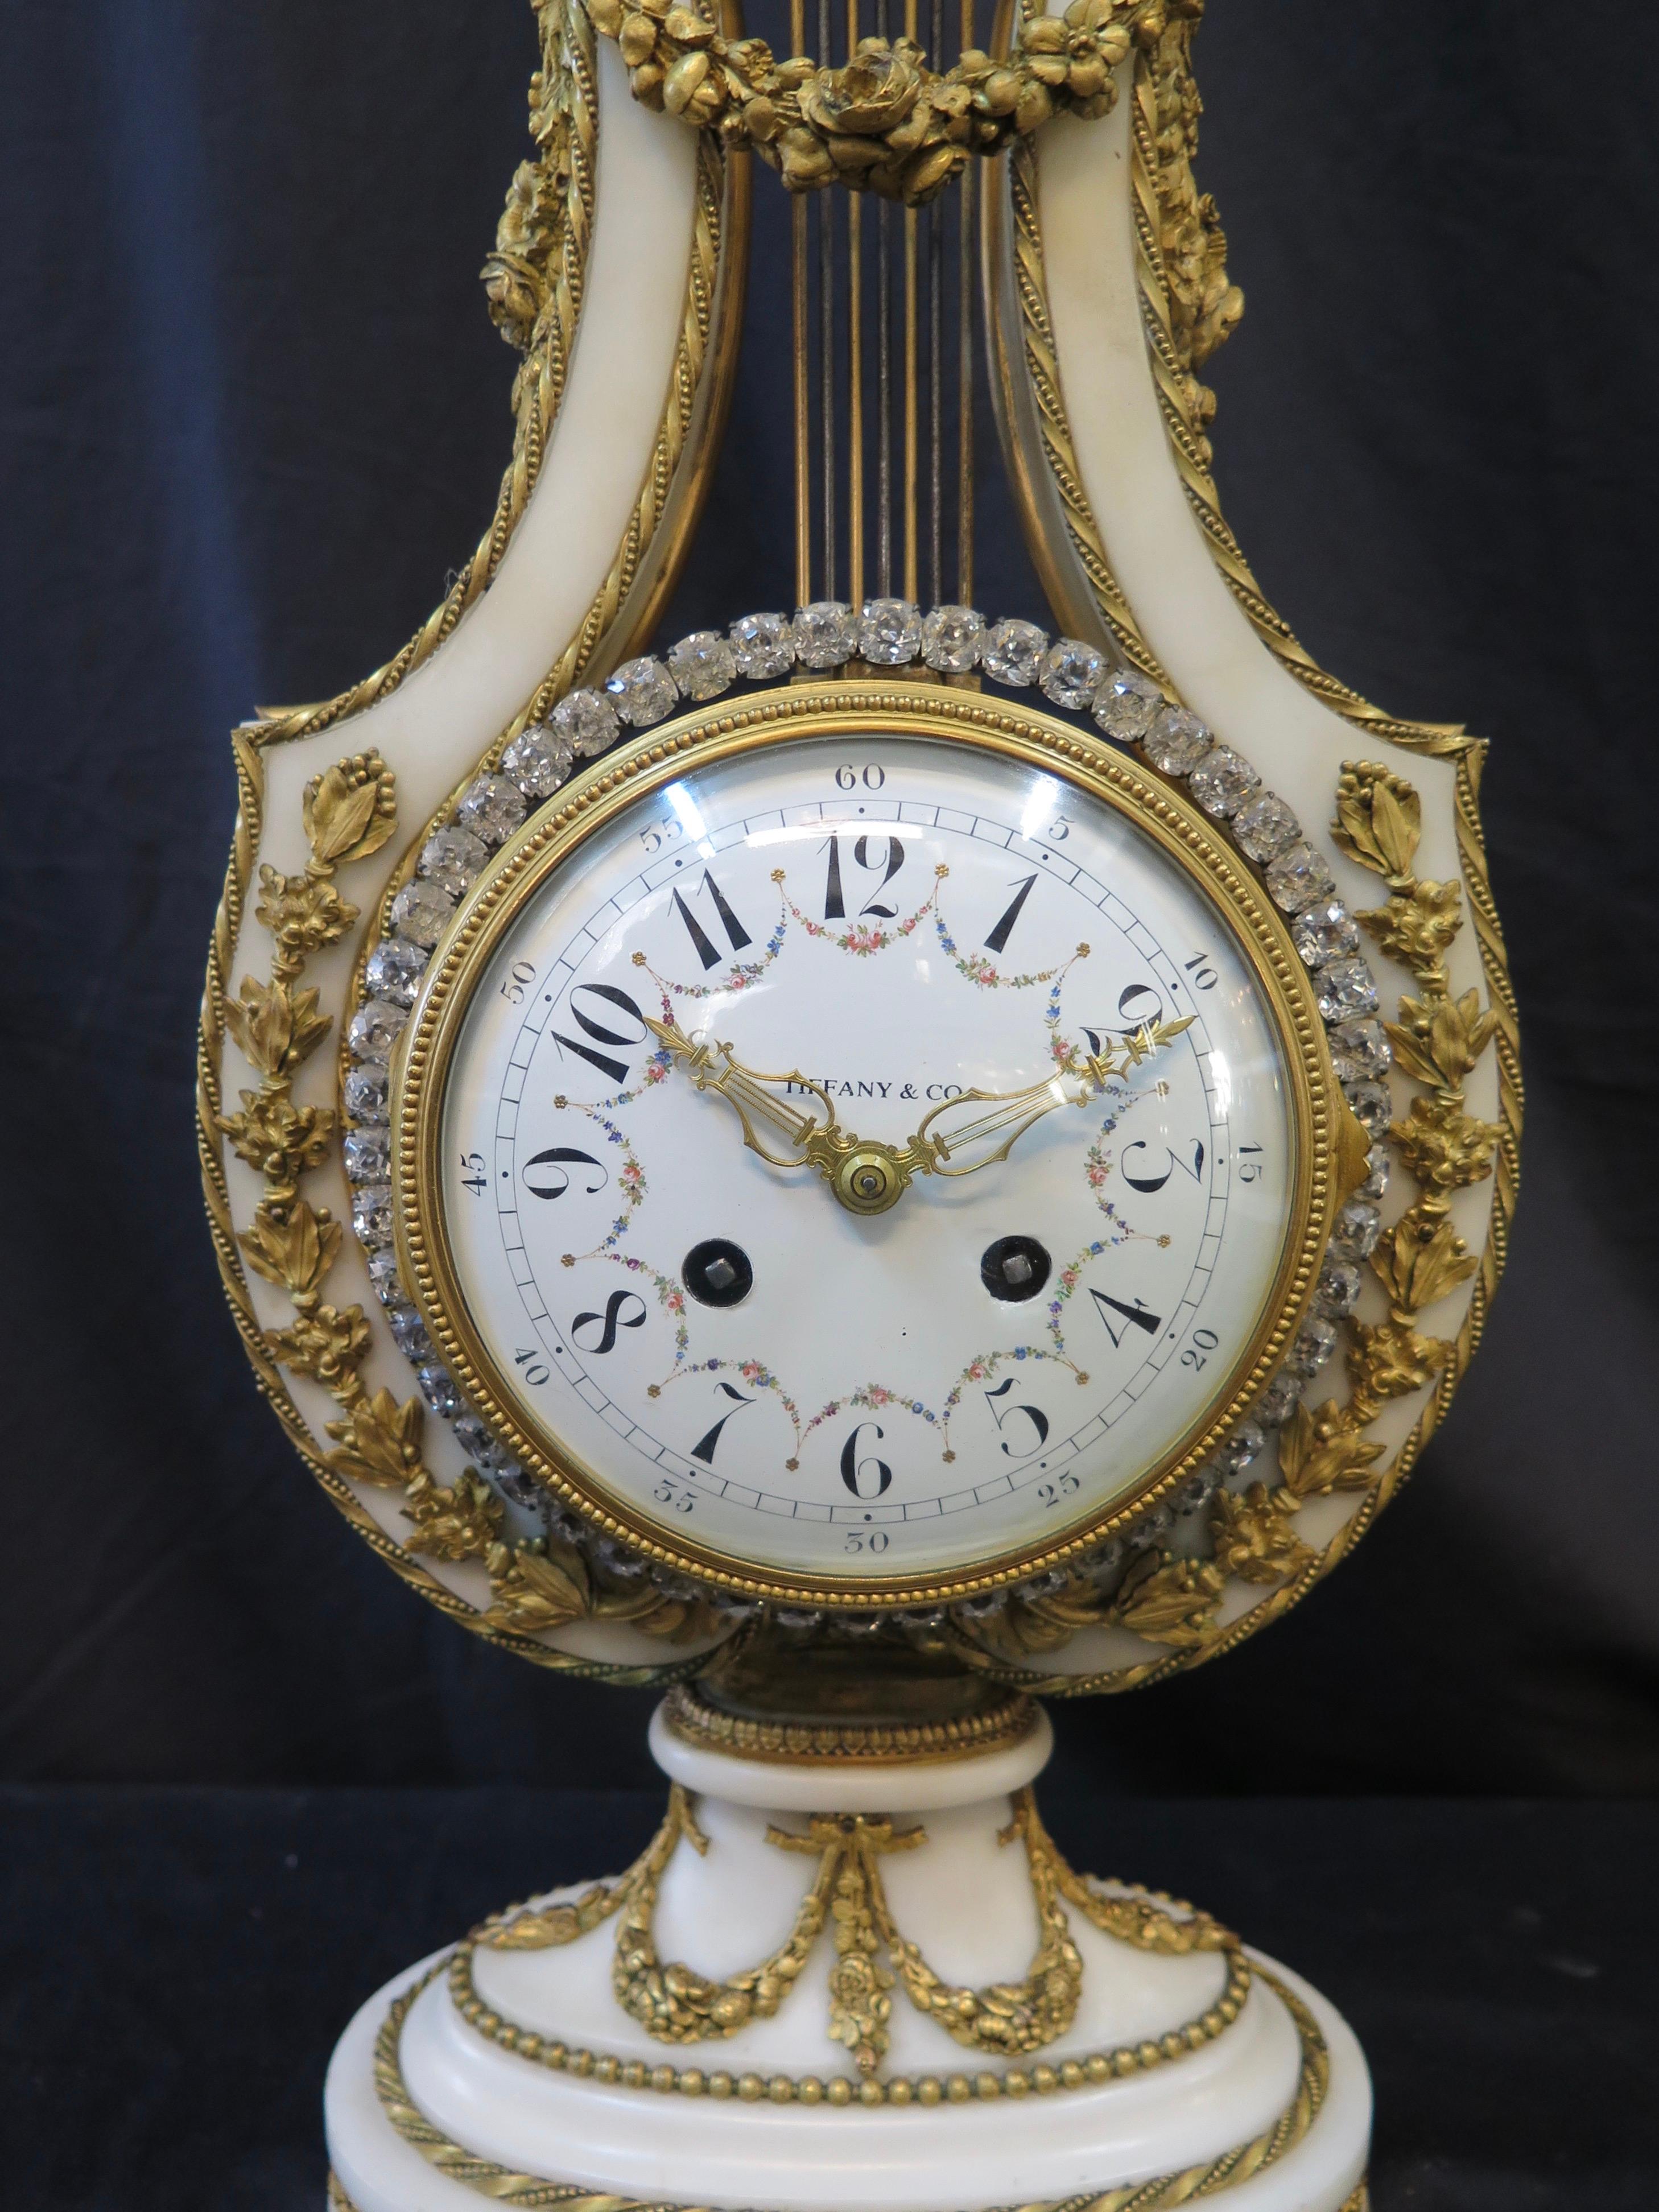 Tis stunning vintage 19th century French Empire white marble mantel (fireplace) clock was made for Tiffany & Co. The clock has a lyre shape body accented with doré' bronze sculpted embellishments of the period. The top of the clock features a